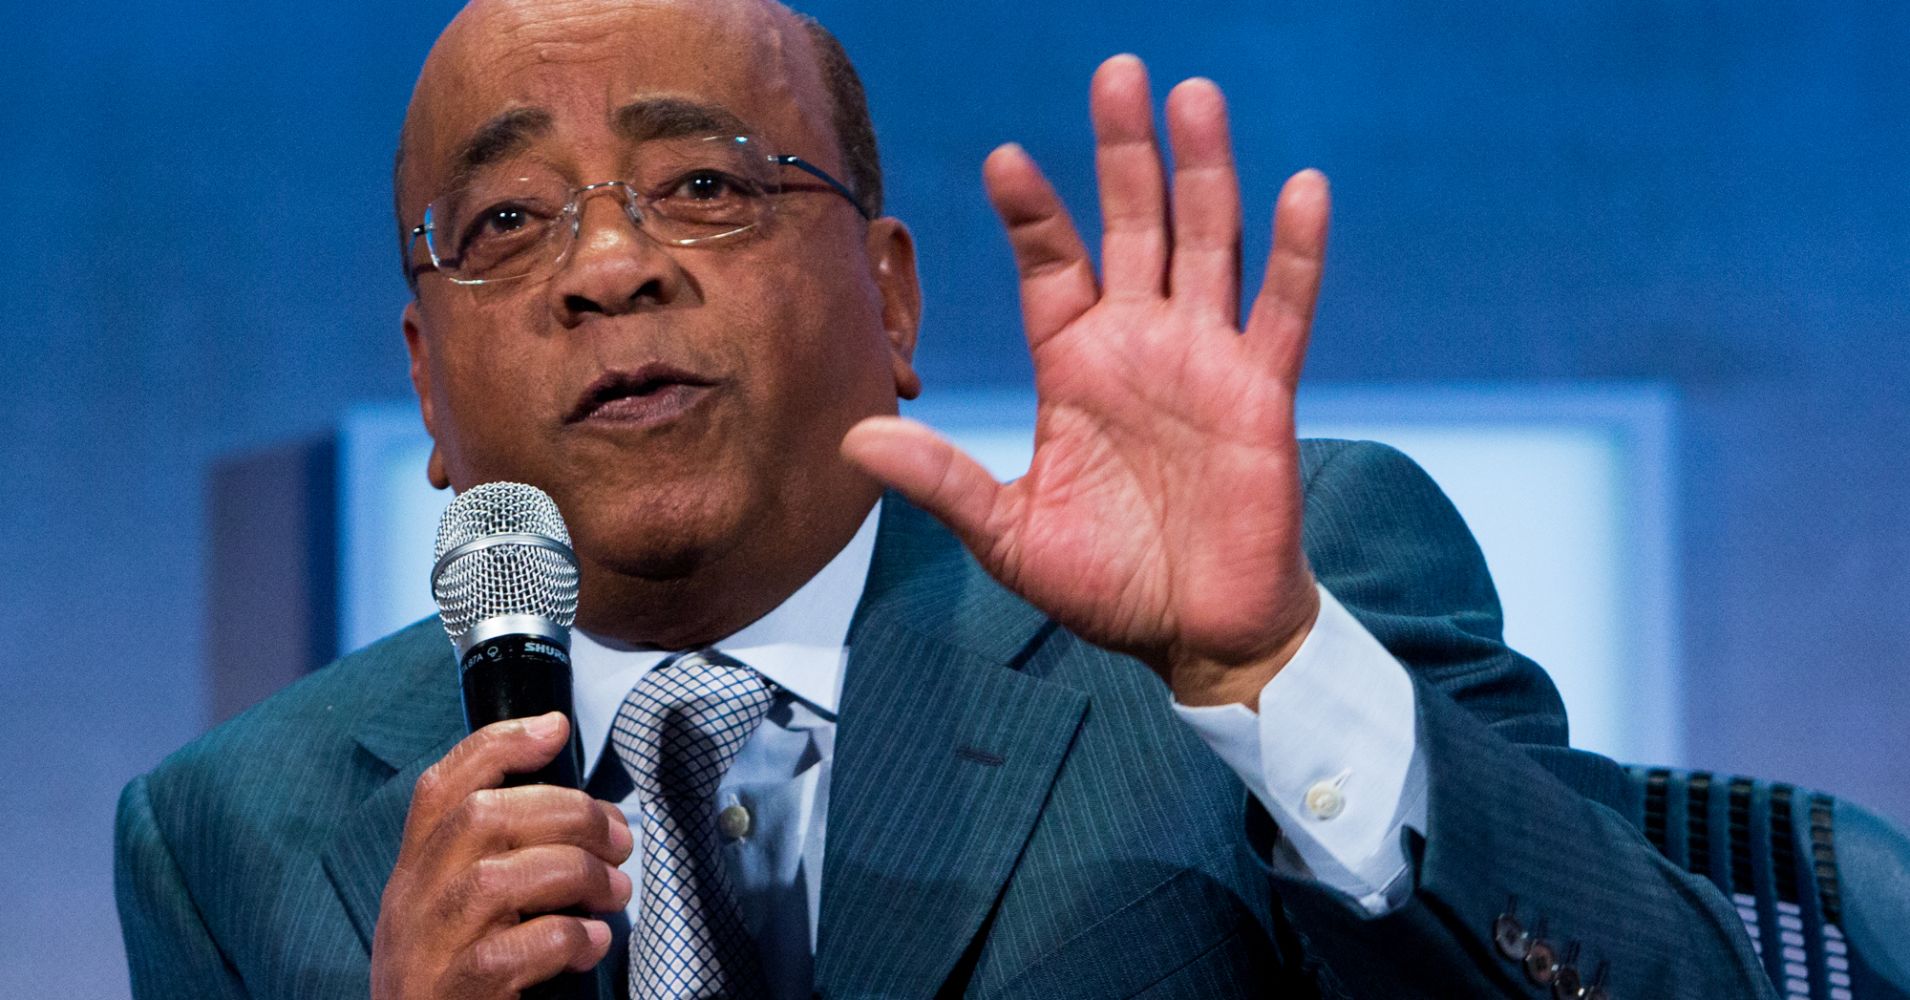 Mo Ibrahim, founder and chairman of Mo Ibrahim Foundation participates in a panel at the Clinton Global Initiative annual meeting in New York.